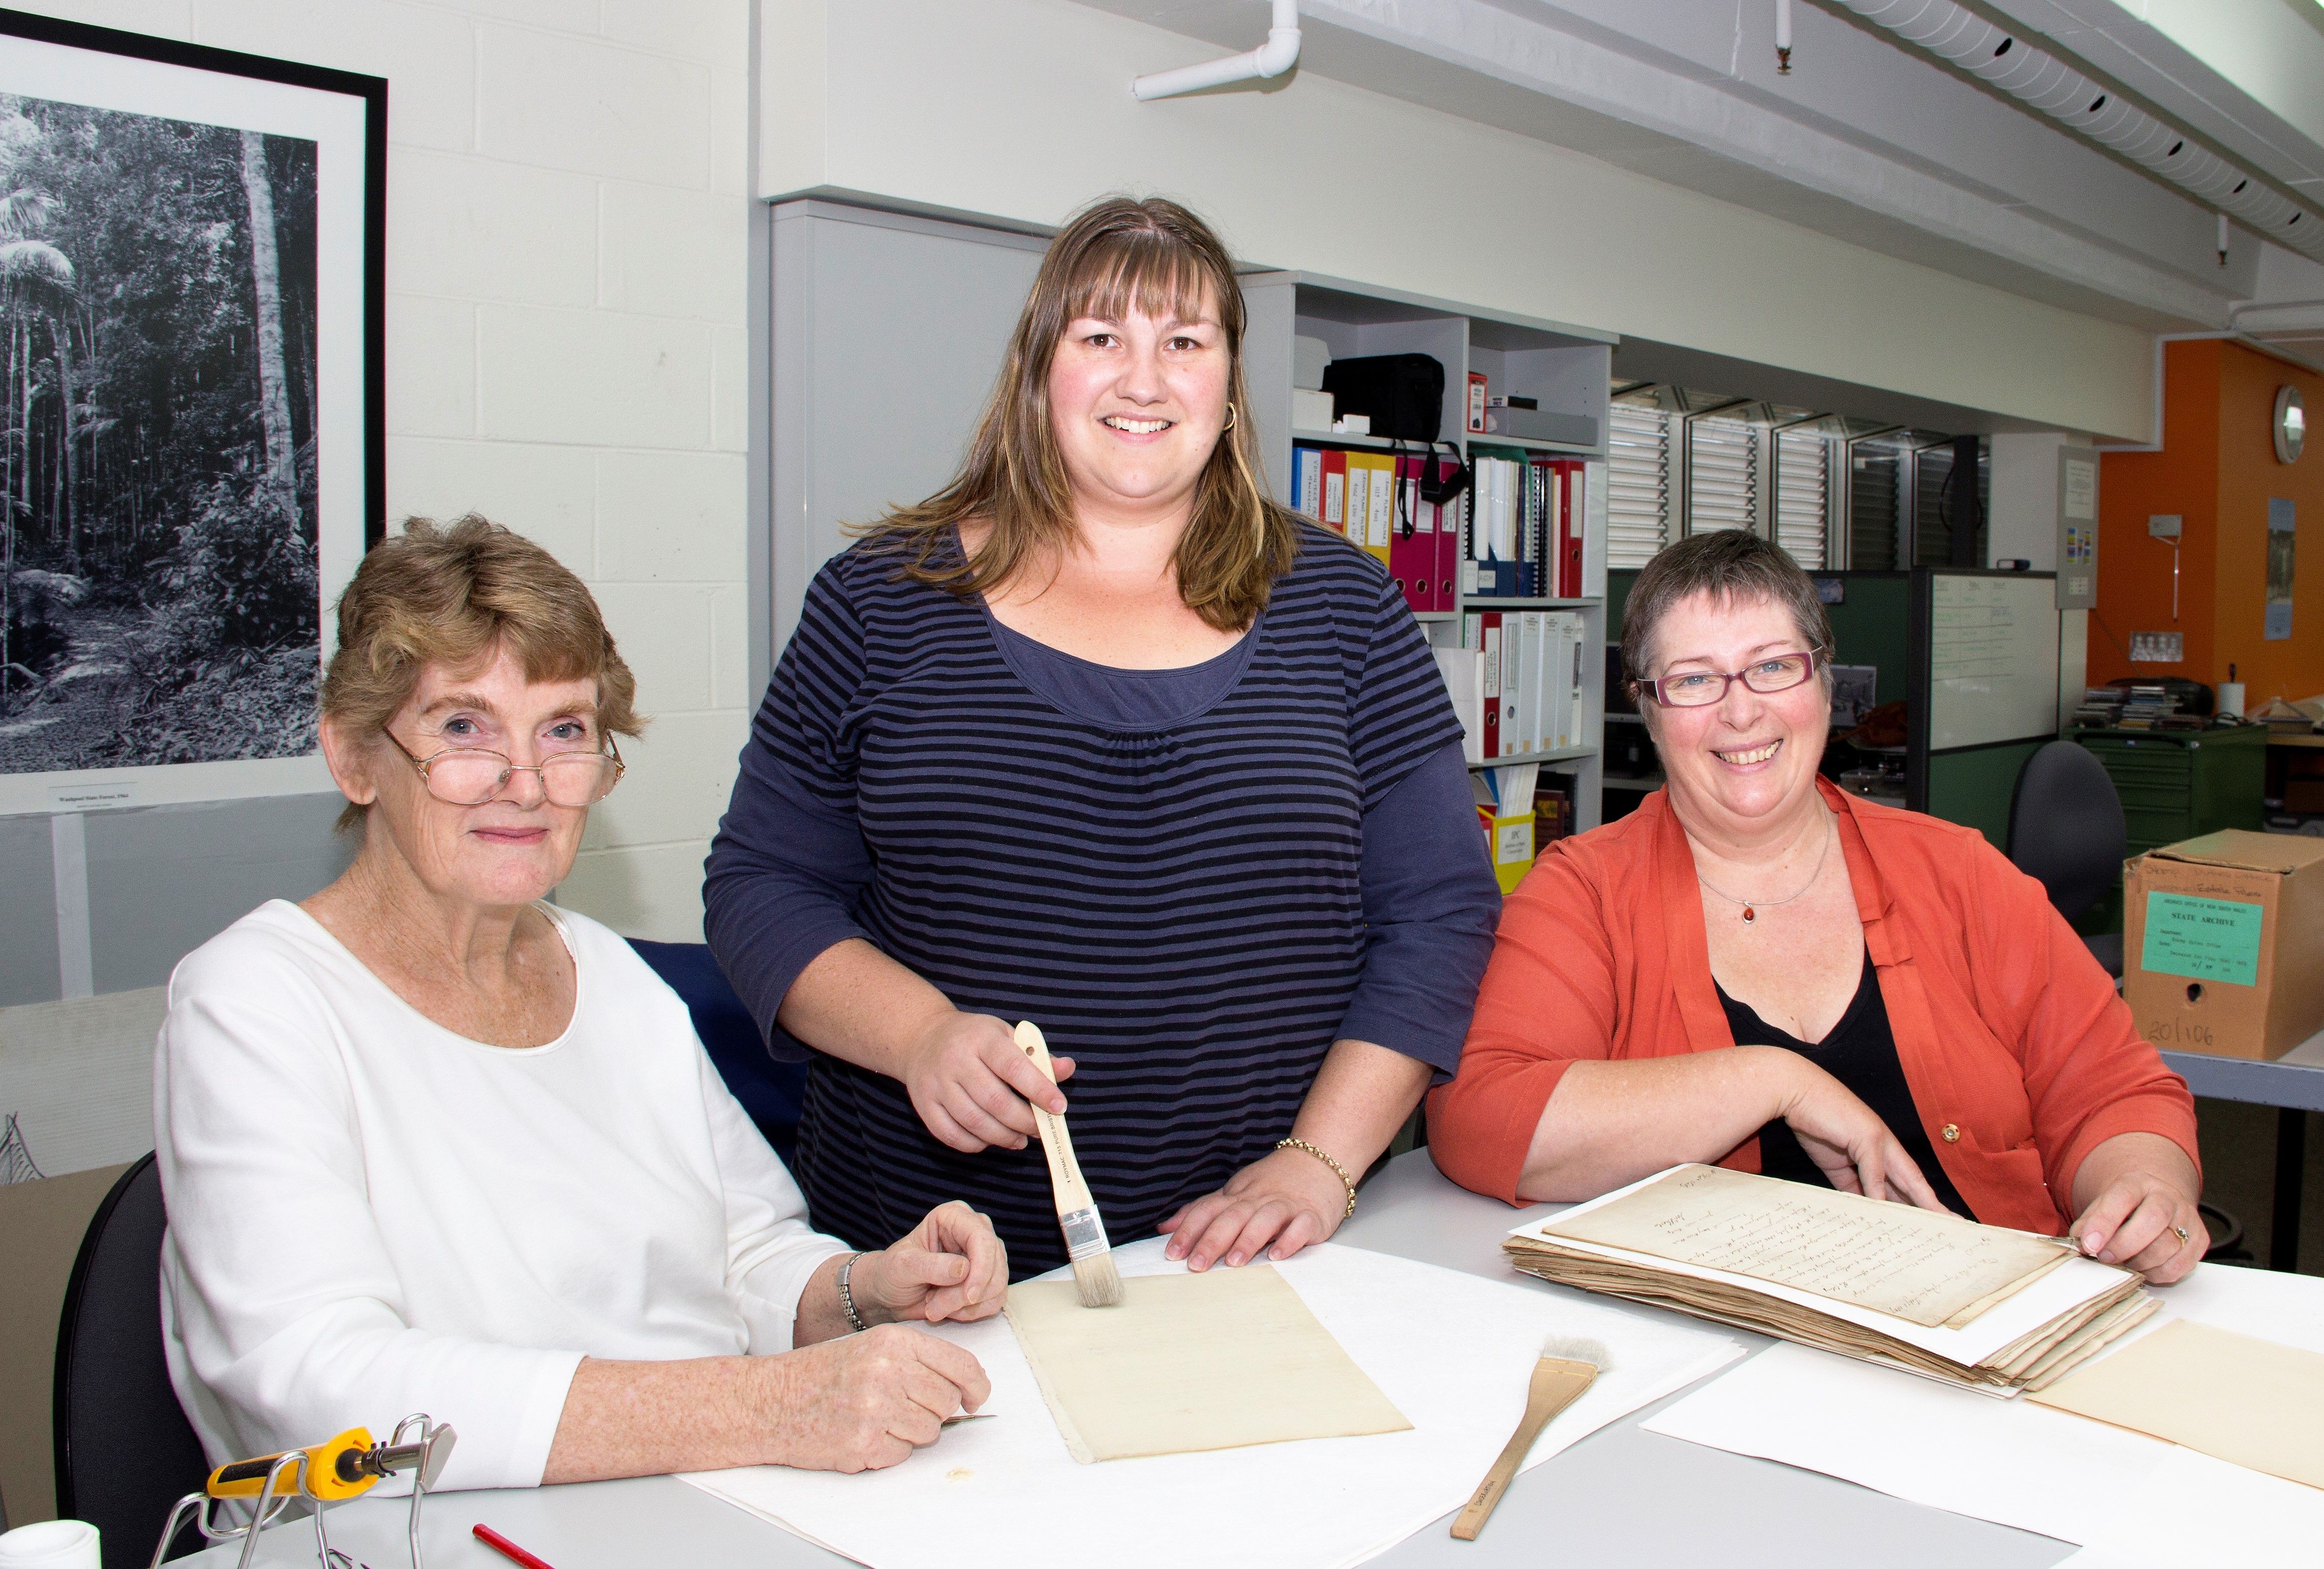 Three women at a work table with a bundles of archival papers